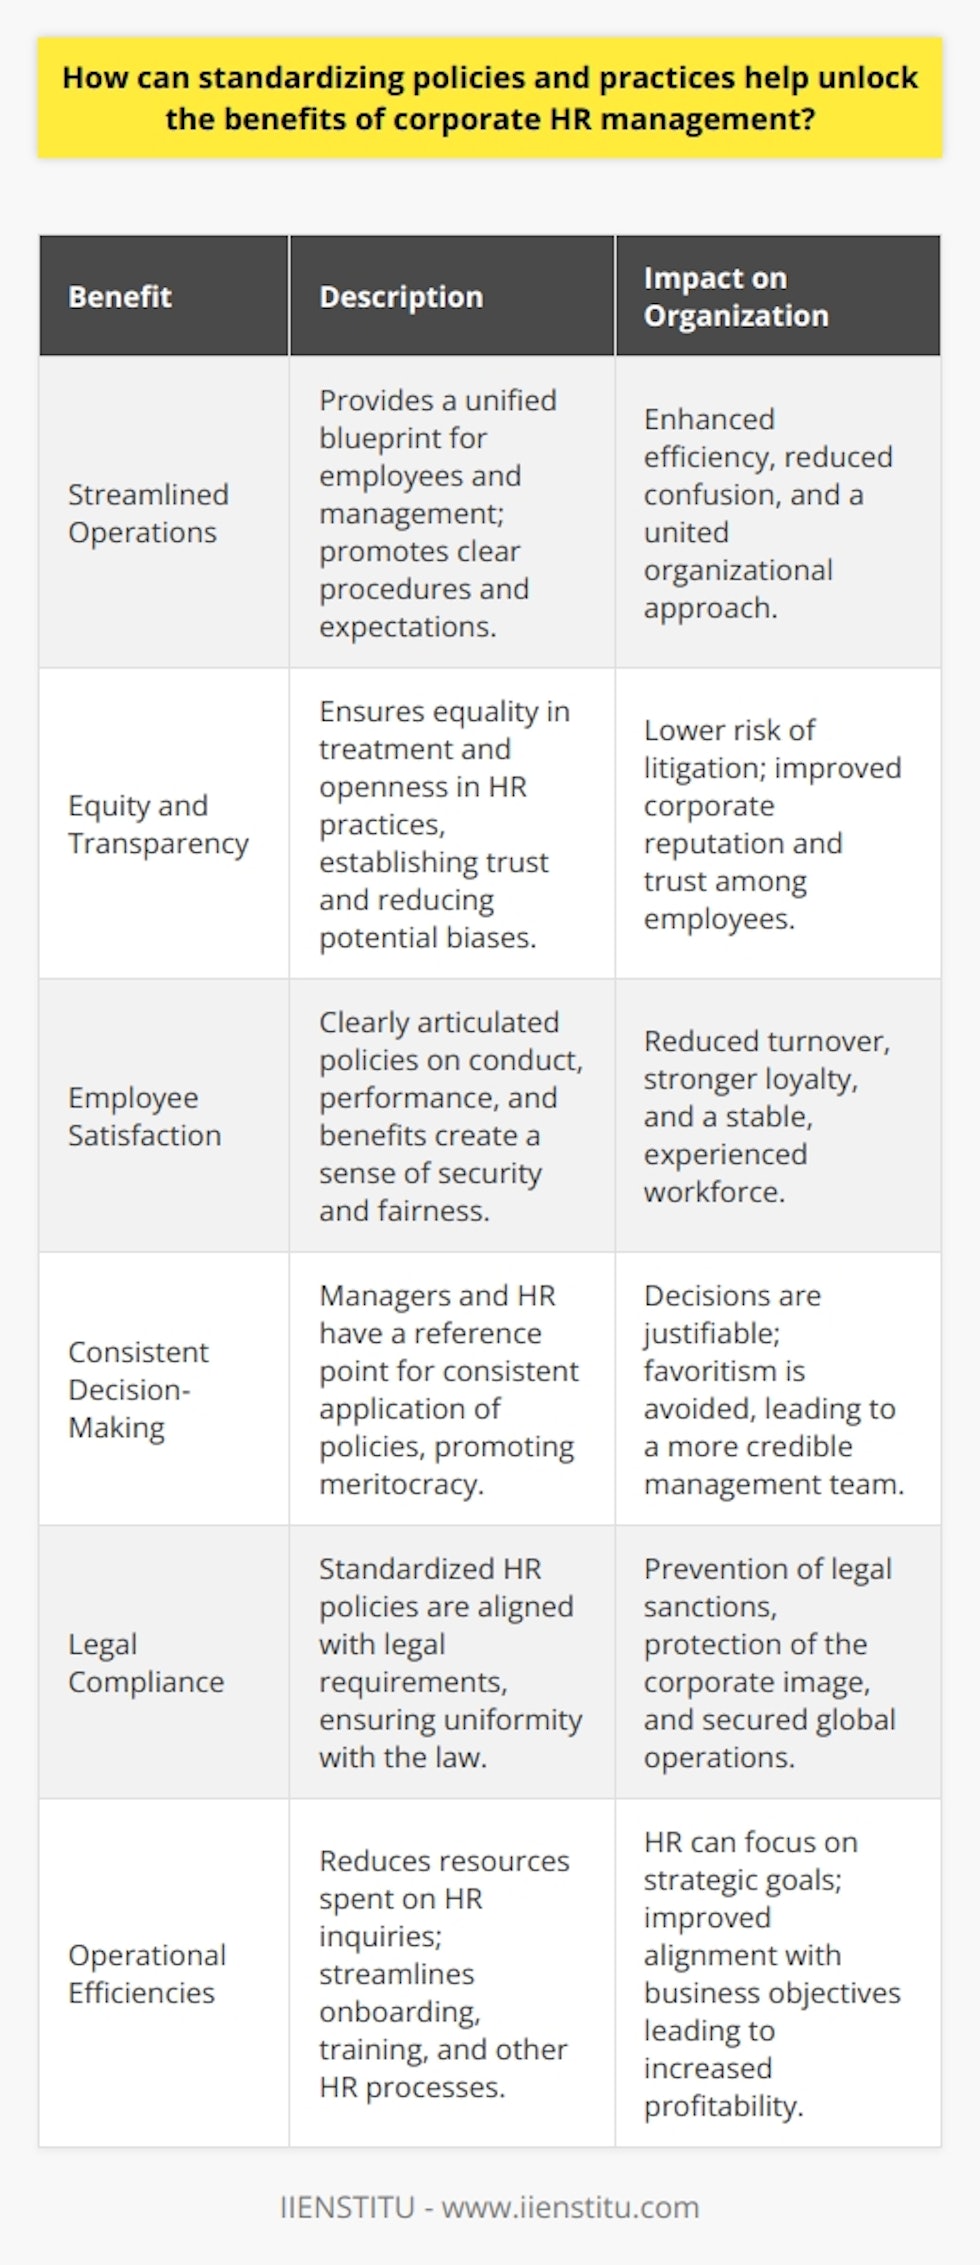 Standardizing HR policies and practices across a corporation provides a backbone for streamlined operations and offers a blueprint for the management and employees to follow. When procedures and expectations are clearly outlined, it promotes equity and transparency, which are fundamental for establishing trust within the organization.Employee satisfaction and loyalty are significantly impacted by how well they understand their role and the company's expectations. This clarity comes with standardized HR policies, which articulate the company’s stance on key issues, including employee conduct, performance expectations, grievance handling, and rewards and benefits. As a result, employees are more likely to have a sense of security and fairness, which reduces turnover rates and fosters a more stable and experienced workforce.Consistency in application of HR practices ensures that all employees are treated equally, which shields the organization from potential litigation due to discriminatory practices. Moreover, when company operations expand into new locations, standardized policies simplify the adaptation process, ensuring that all branches operate under the same set of core values and guidelines.Improved communication is another critical benefit of standardization. As everyone in the organization refers to one cohesive set of guidelines, it mitigates confusion and ambiguity. This can be particularly valuable in multi-departmental collaborations, where different teams must coalesce to achieve a common goal.Additionally, decision-making is enhanced when policies and practices are standardized. Managers and HR professionals have a reference point for consistent decision-making, which is crucial for avoiding favoritism and promoting meritocracy. The set standards act as a pre-established framework that guides actions and justifies decisions, which can be essential in complex HR scenarios. When it comes to legal compliance, having standardized HR policies and practices ensures that the organization meets the legal requirements across different regions and countries. This can save the corporation from costly legal sanctions and damage to its reputation. Policies can be aligned with local laws while maintaining the corporation's global ethos, thus balancing uniformity with legal adherence.Operational efficiencies gained through standardized HR processes cannot be understated. These efficiencies stem from reduced time and resources devoted to HR-related inquiries and problem-solving, as employees have clear guidelines to follow. Standardization streamlines onboarding, training, performance reviews, and exit processes. This uniformity allows HR professionals to focus on strategic planning and alignment of HR objectives with overall business goals.In conclusion, standardizing HR policies and practices offers a clear roadmap for the efficient and effective management of human resources within a corporation. It forms the foundation for a solid organizational culture, marked by fairness, clarity, legal compliance, and operational excellence. The resultant benefits are comprehensive and can lead to increased profitability and sustainable business success.